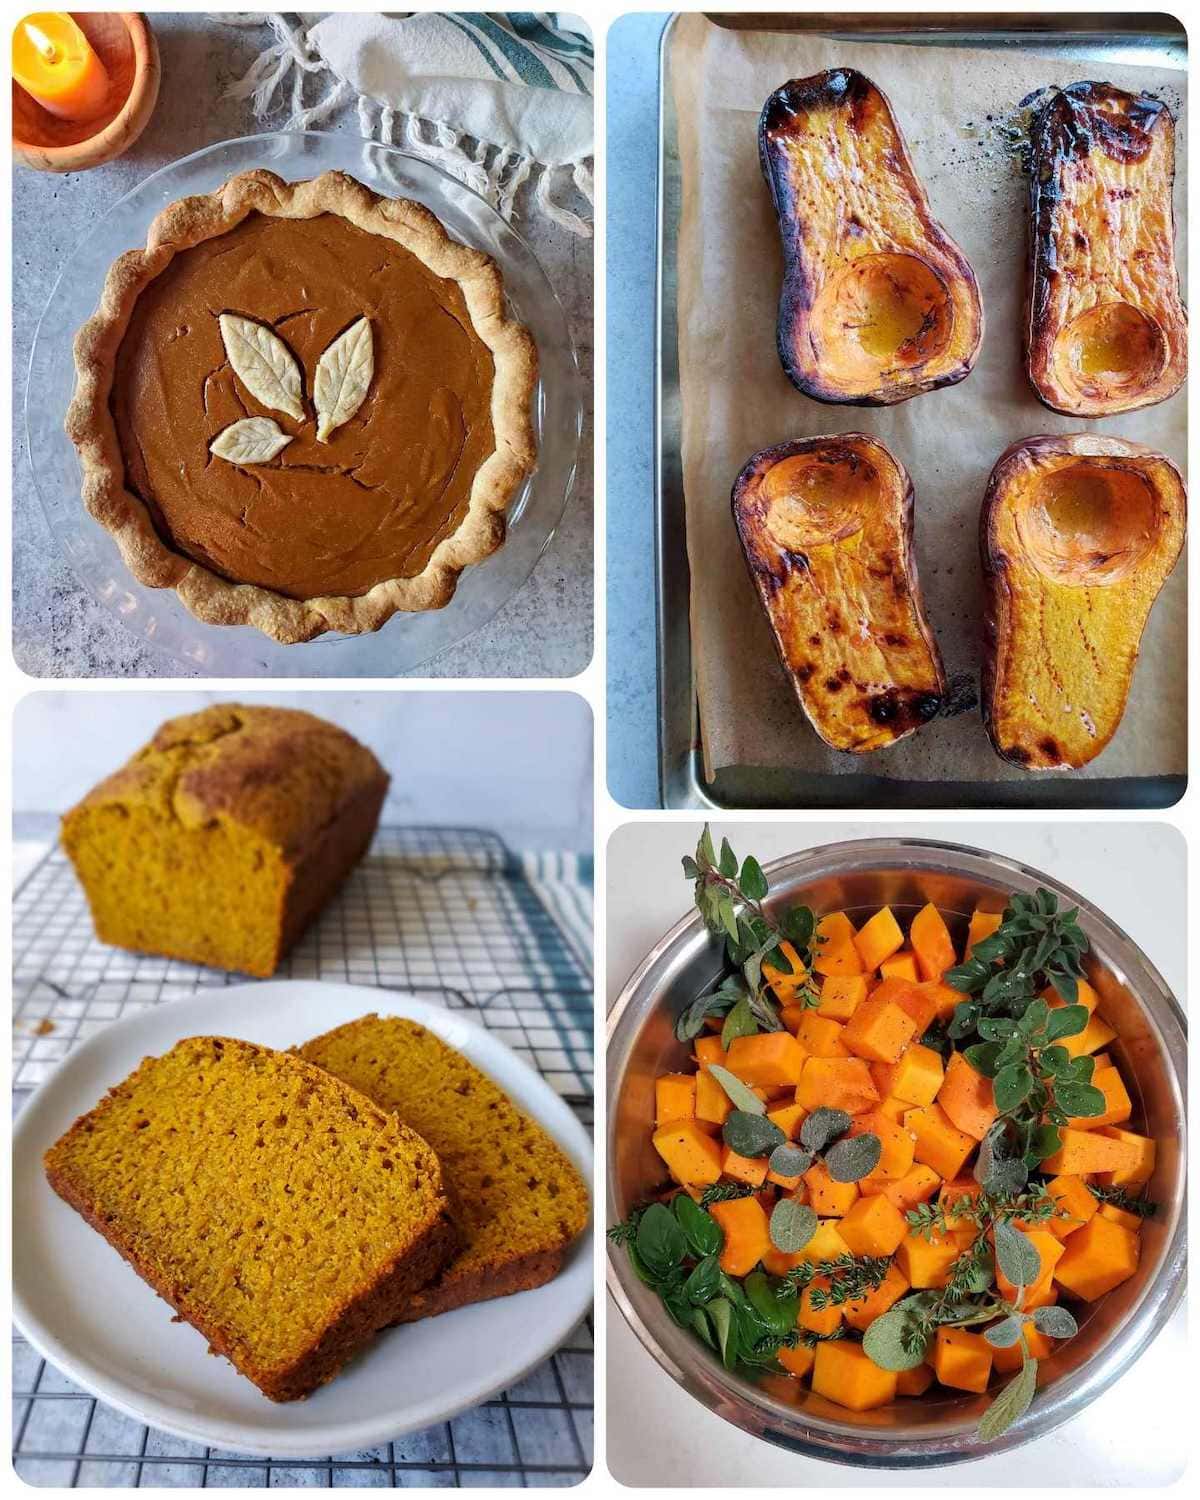 A four way image collage, the first image shows a baked butternut "pumpkin" pie sitting in a glass pie container. The second image shows 4 halves of butternut squash cut lengthwise sitting face up on a baking sheet. They have been roasted in the oven and contain caramelized brown and black spots throughout the flesh. The third image shows two slices of pumpkin bread sitting on a small white plate, beyond is the rest of the pumpkin bread sitting on a wire cooling rack. The fourth image shows a metal bowl full of cubed butternut squash that are sitting amongst fresh herbs like oregano, sage, and thyme. Grow winter squash to create a variety of delicious homemade meals. 